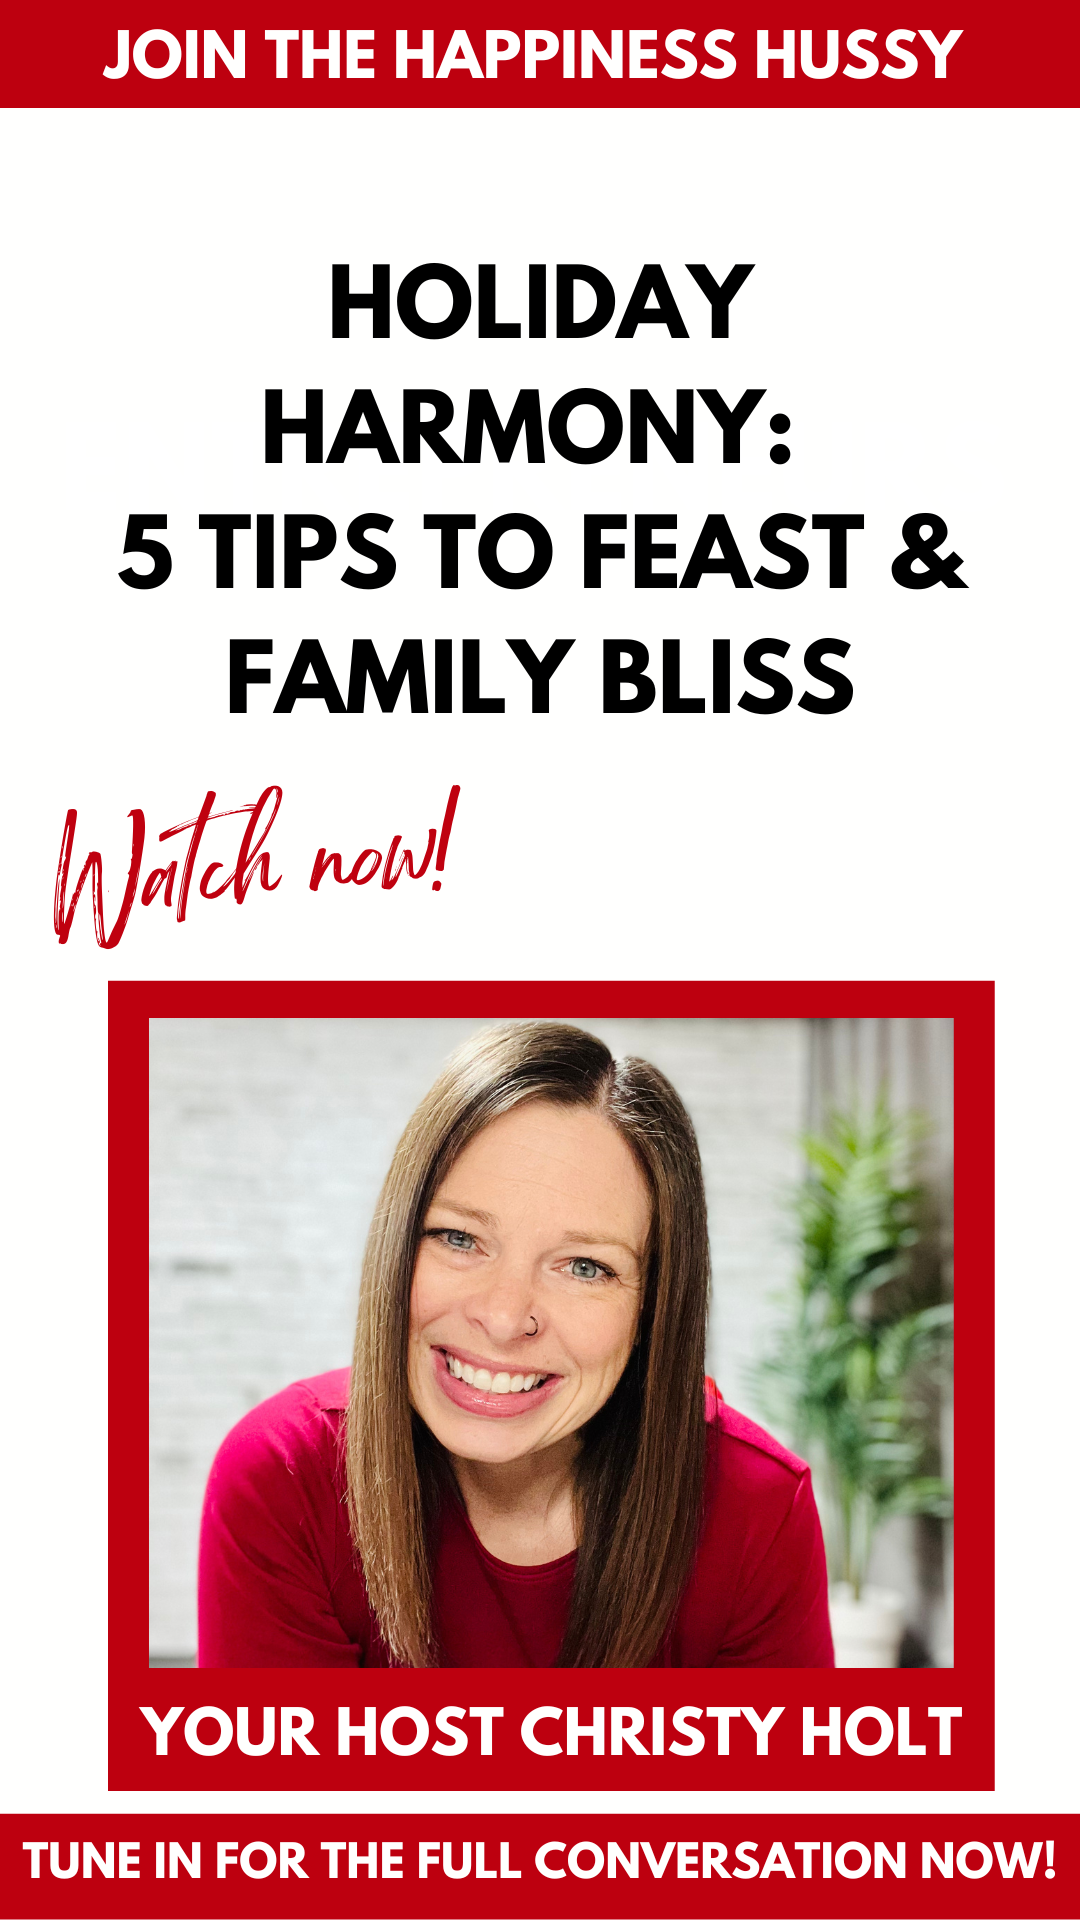 Ready to transform holiday stress into festive success? Dive into our 5 golden tips for delightful dishes and drama-free family time! You won't want to miss this ‘recipe’ for a joyous season.